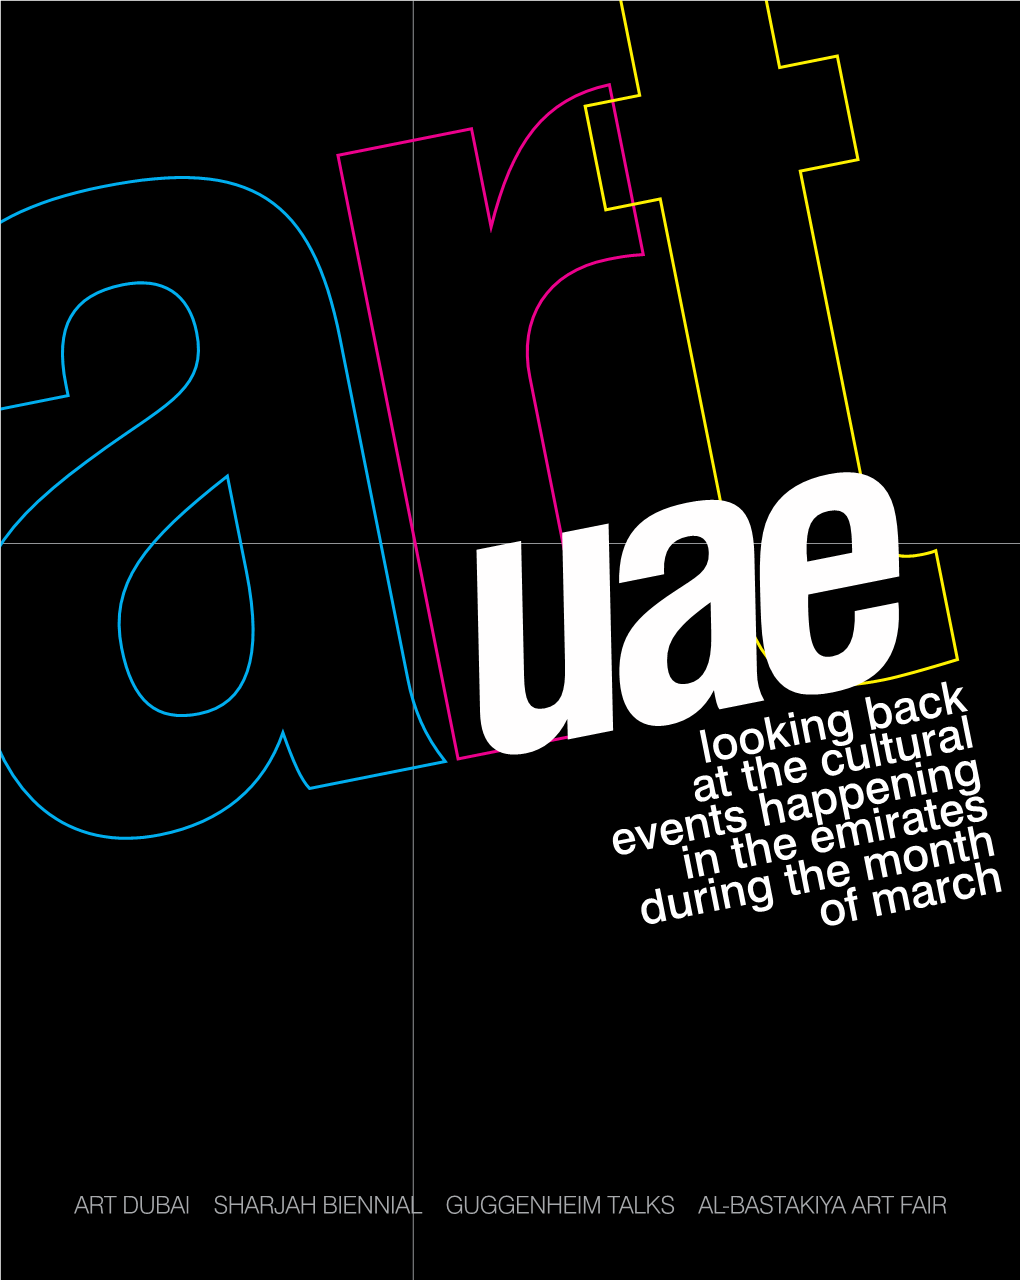 Looking Back at the Cultural Events Happening in the Emirates During